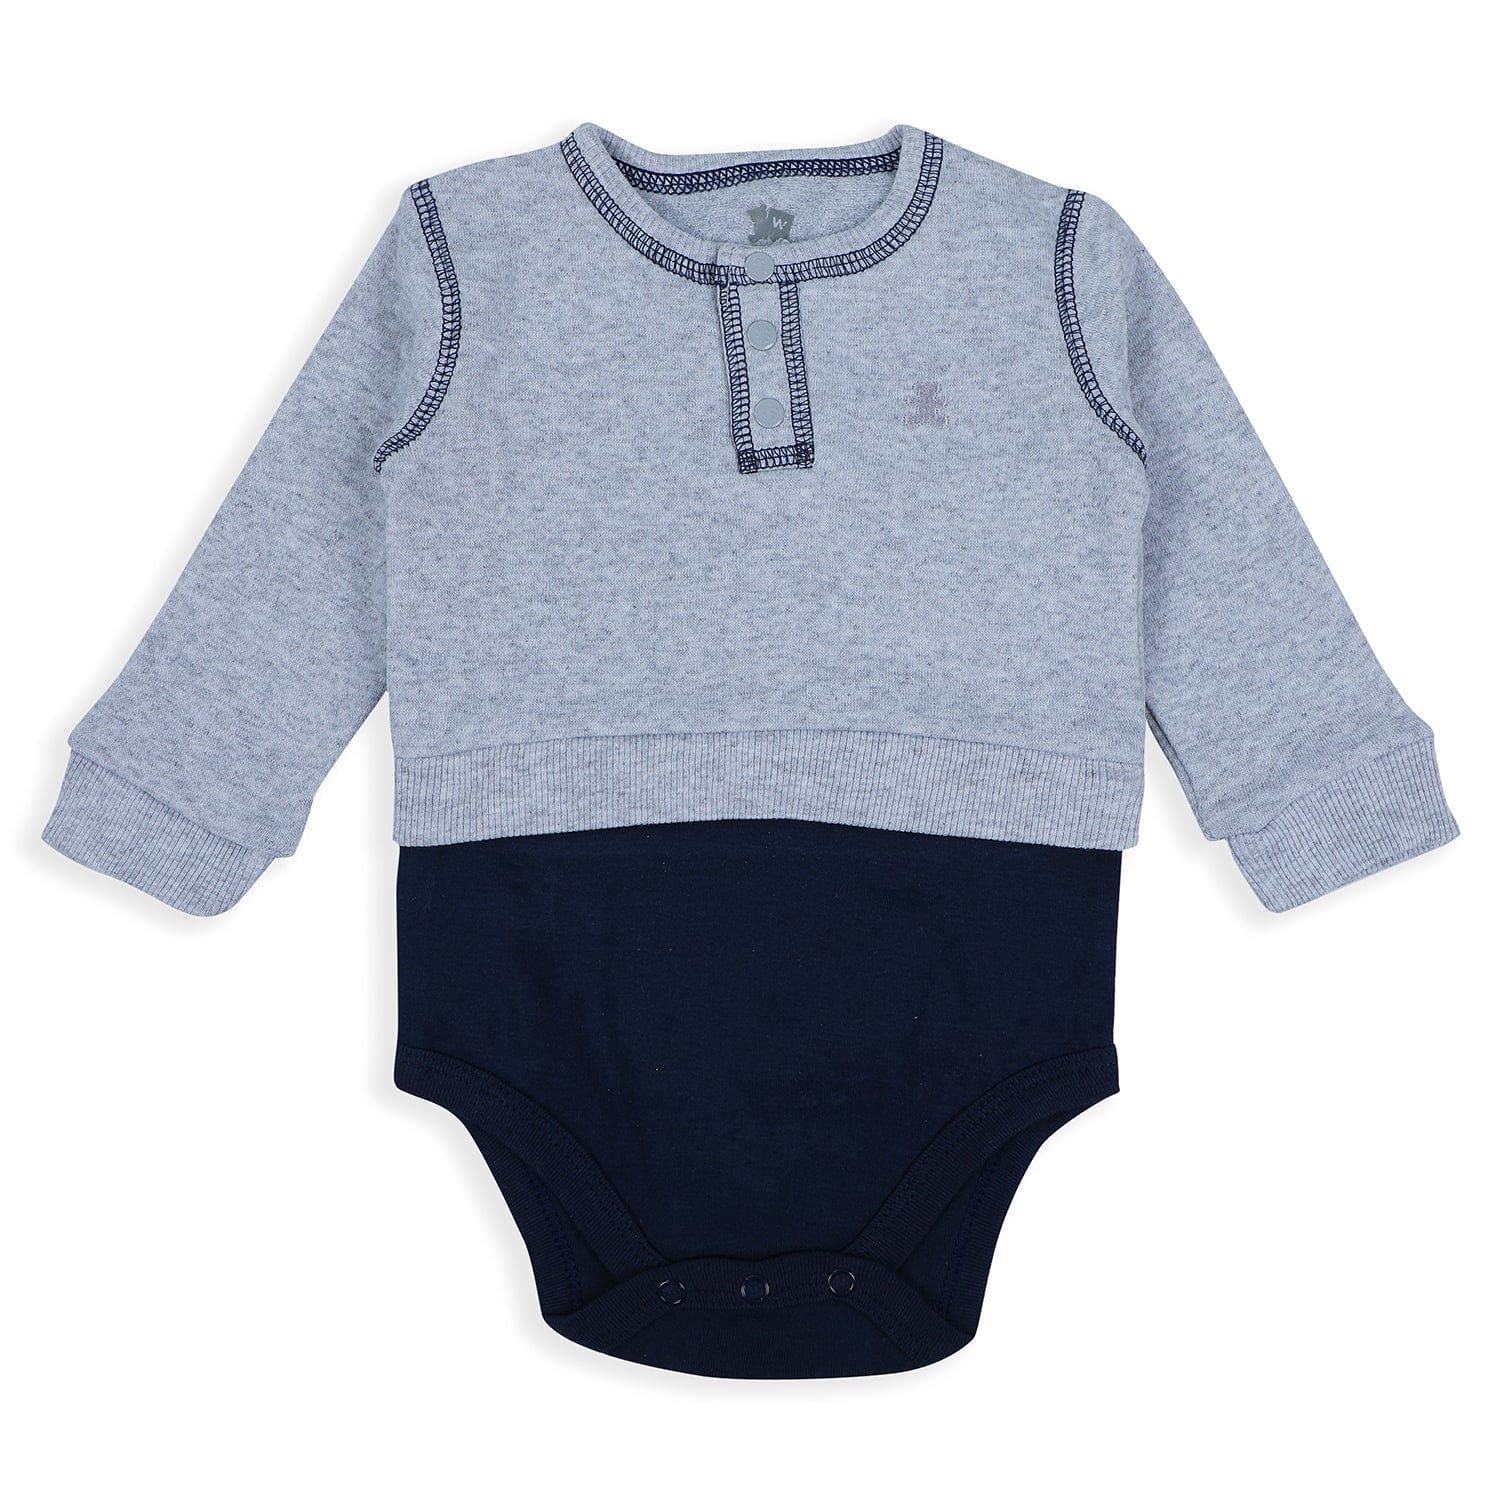 Baby Moo Solid Stretchable Jogger with Full Sleeve Onesie And Booties Gift Set - Grey - Baby Moo